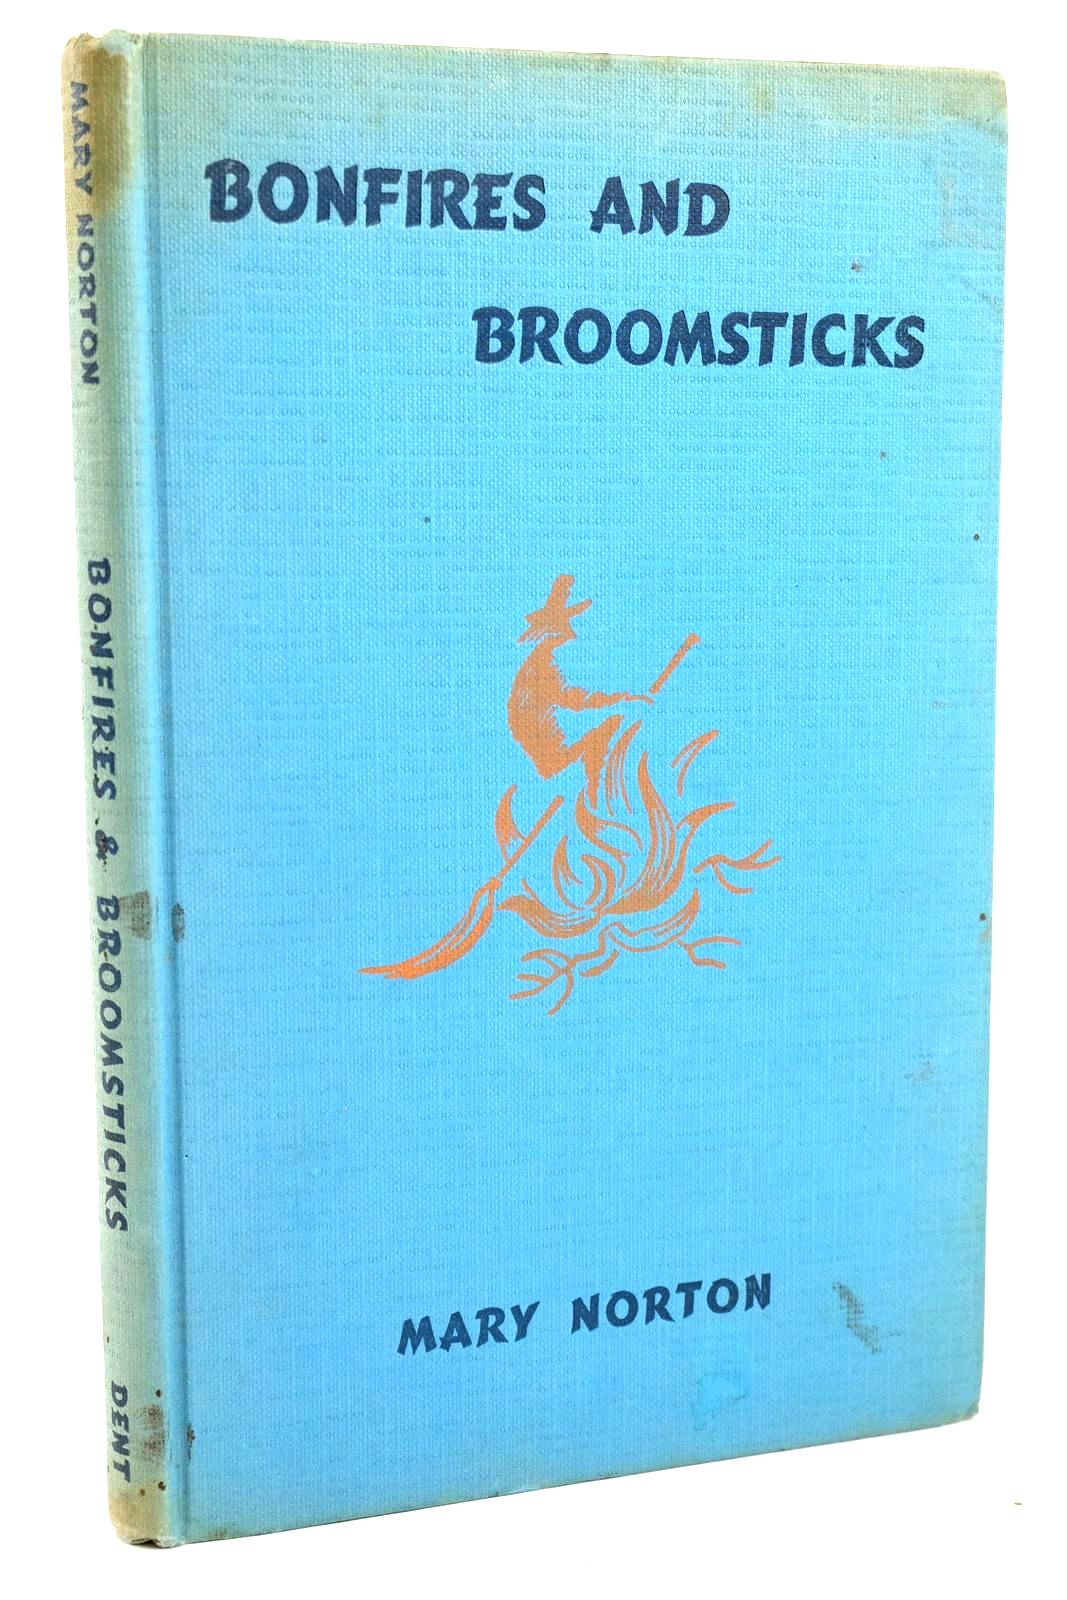 Photo of BONFIRES AND BROOMSTICKS written by Norton, Mary illustrated by Adshead, Mary published by J.M. Dent & Sons Ltd. (STOCK CODE: 1320517)  for sale by Stella & Rose's Books